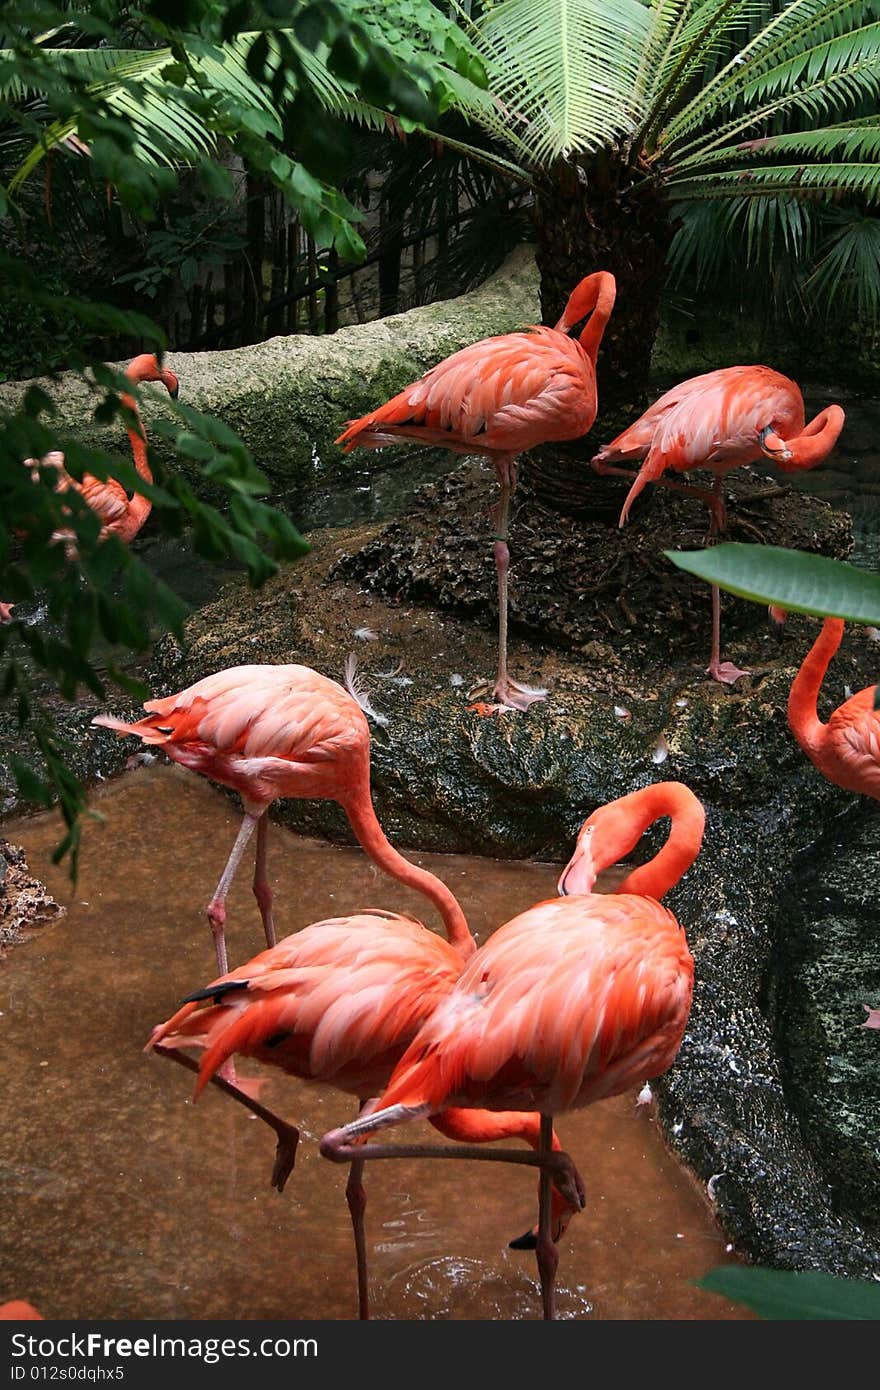 Several flamingos rest and eat in a tropical setting.